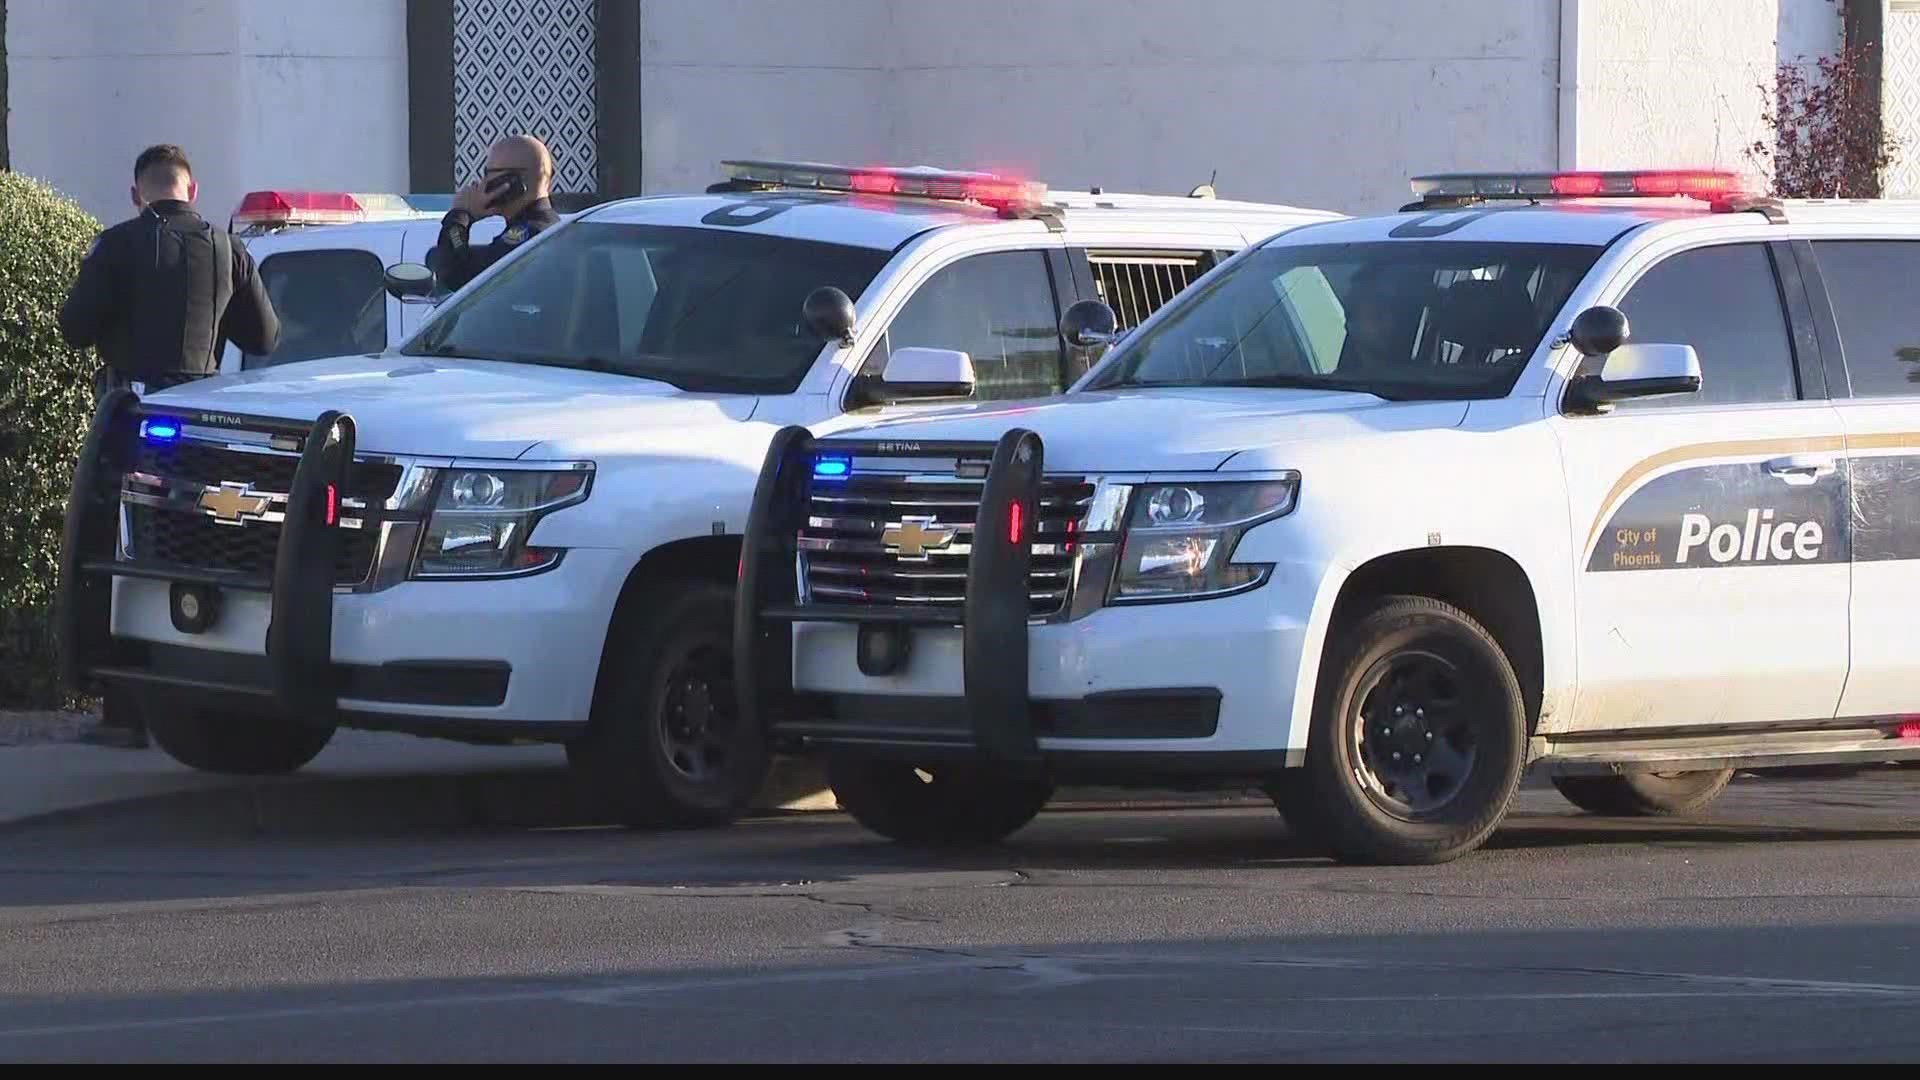 A domestic violence suspect was shot by a Phoenix police officer Monday afternoon after authorities say he was seen armed with a gun.